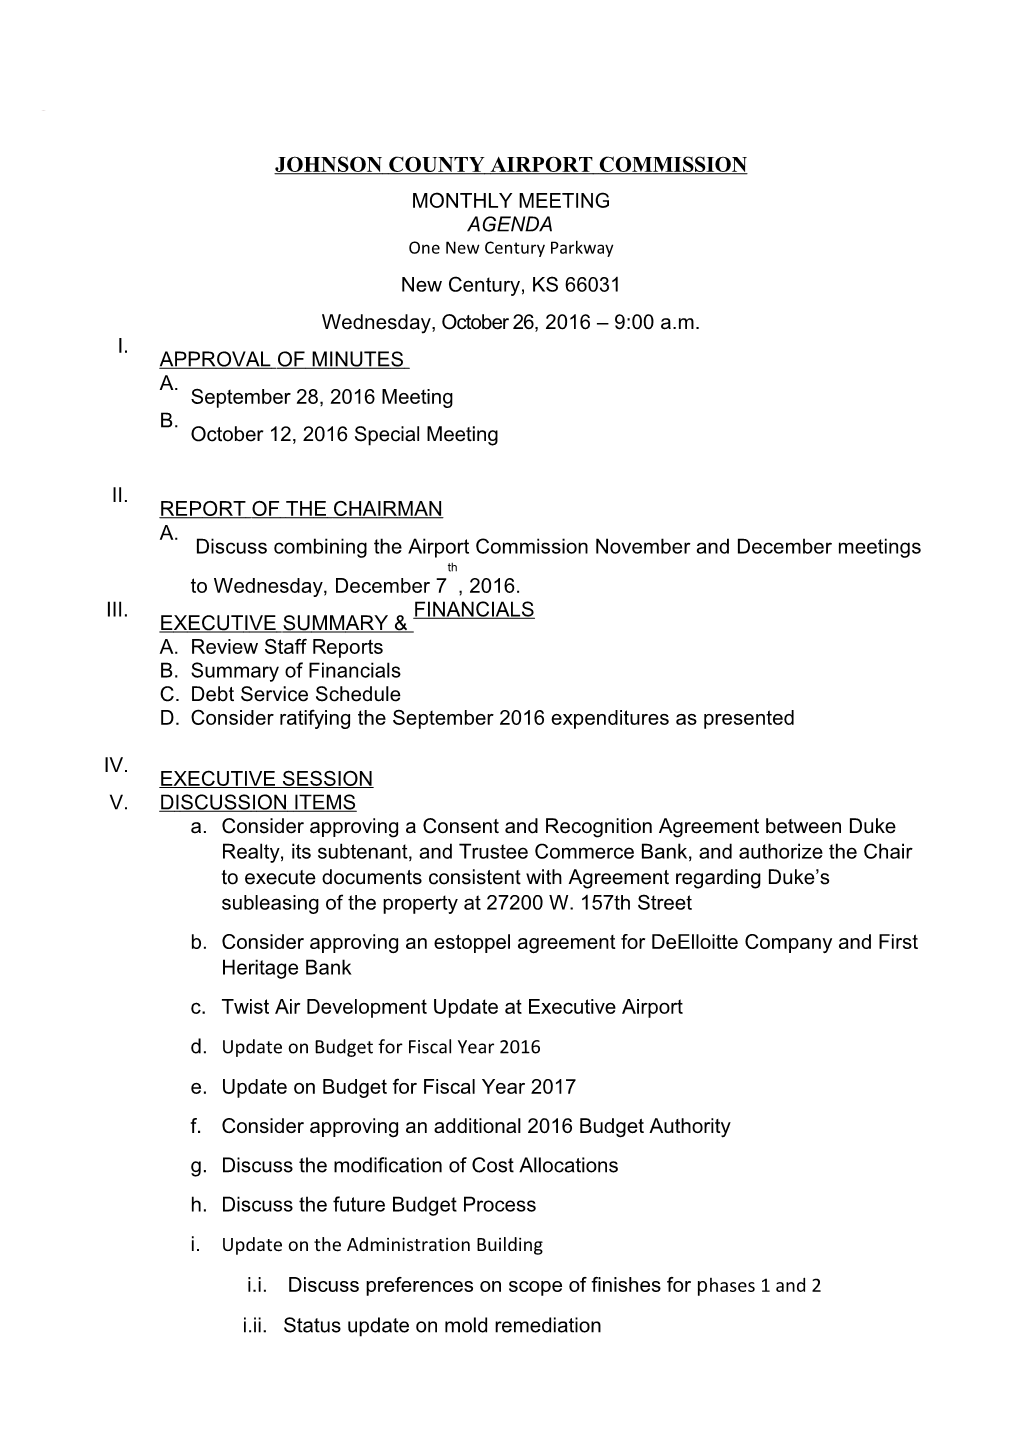 Johnson County Airport Commission s1